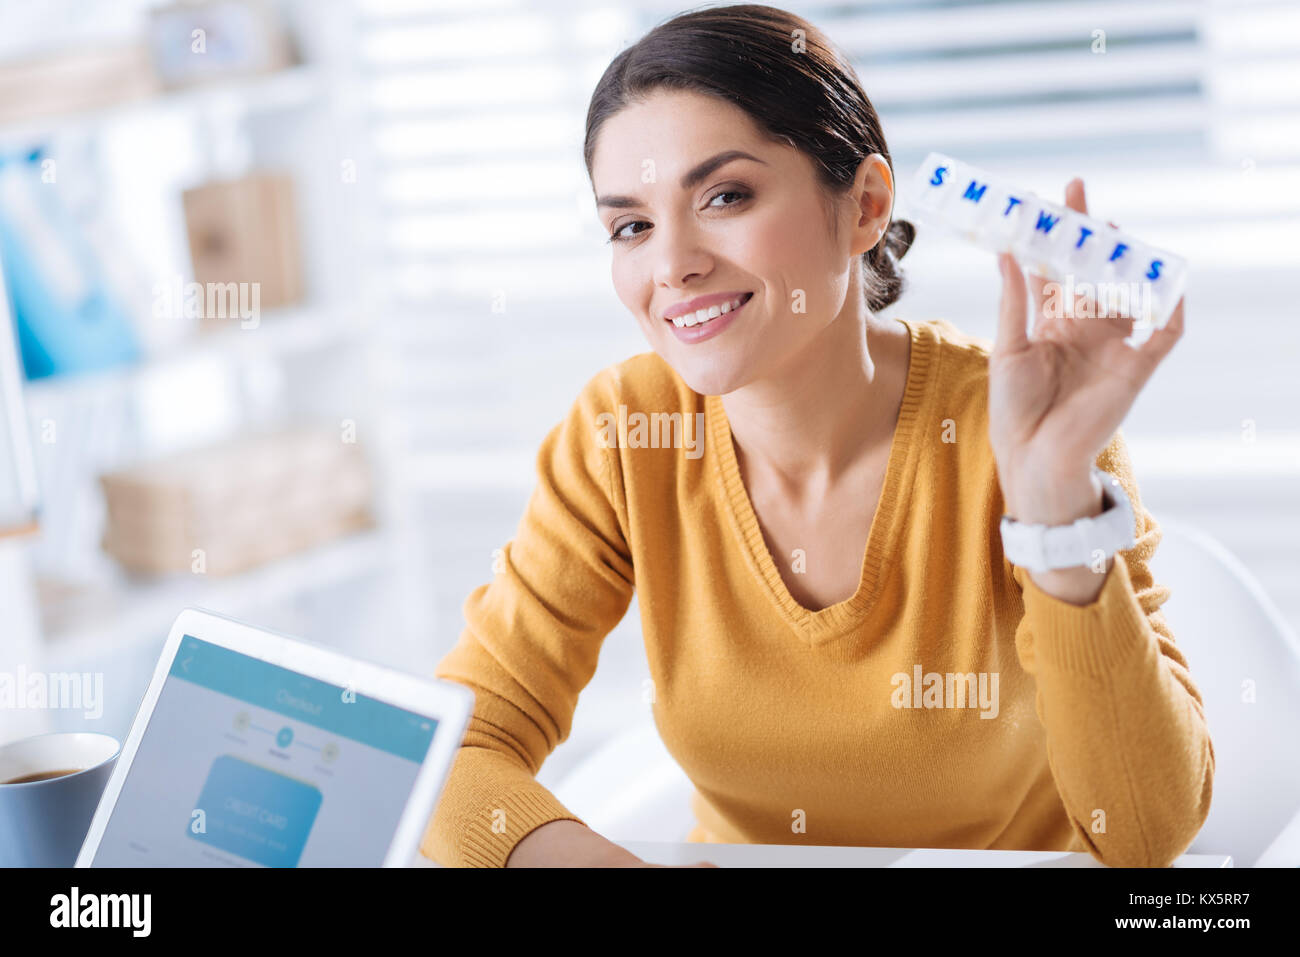 Smiling woman holding a useful pillbox and feeling glad to recover Stock Photo